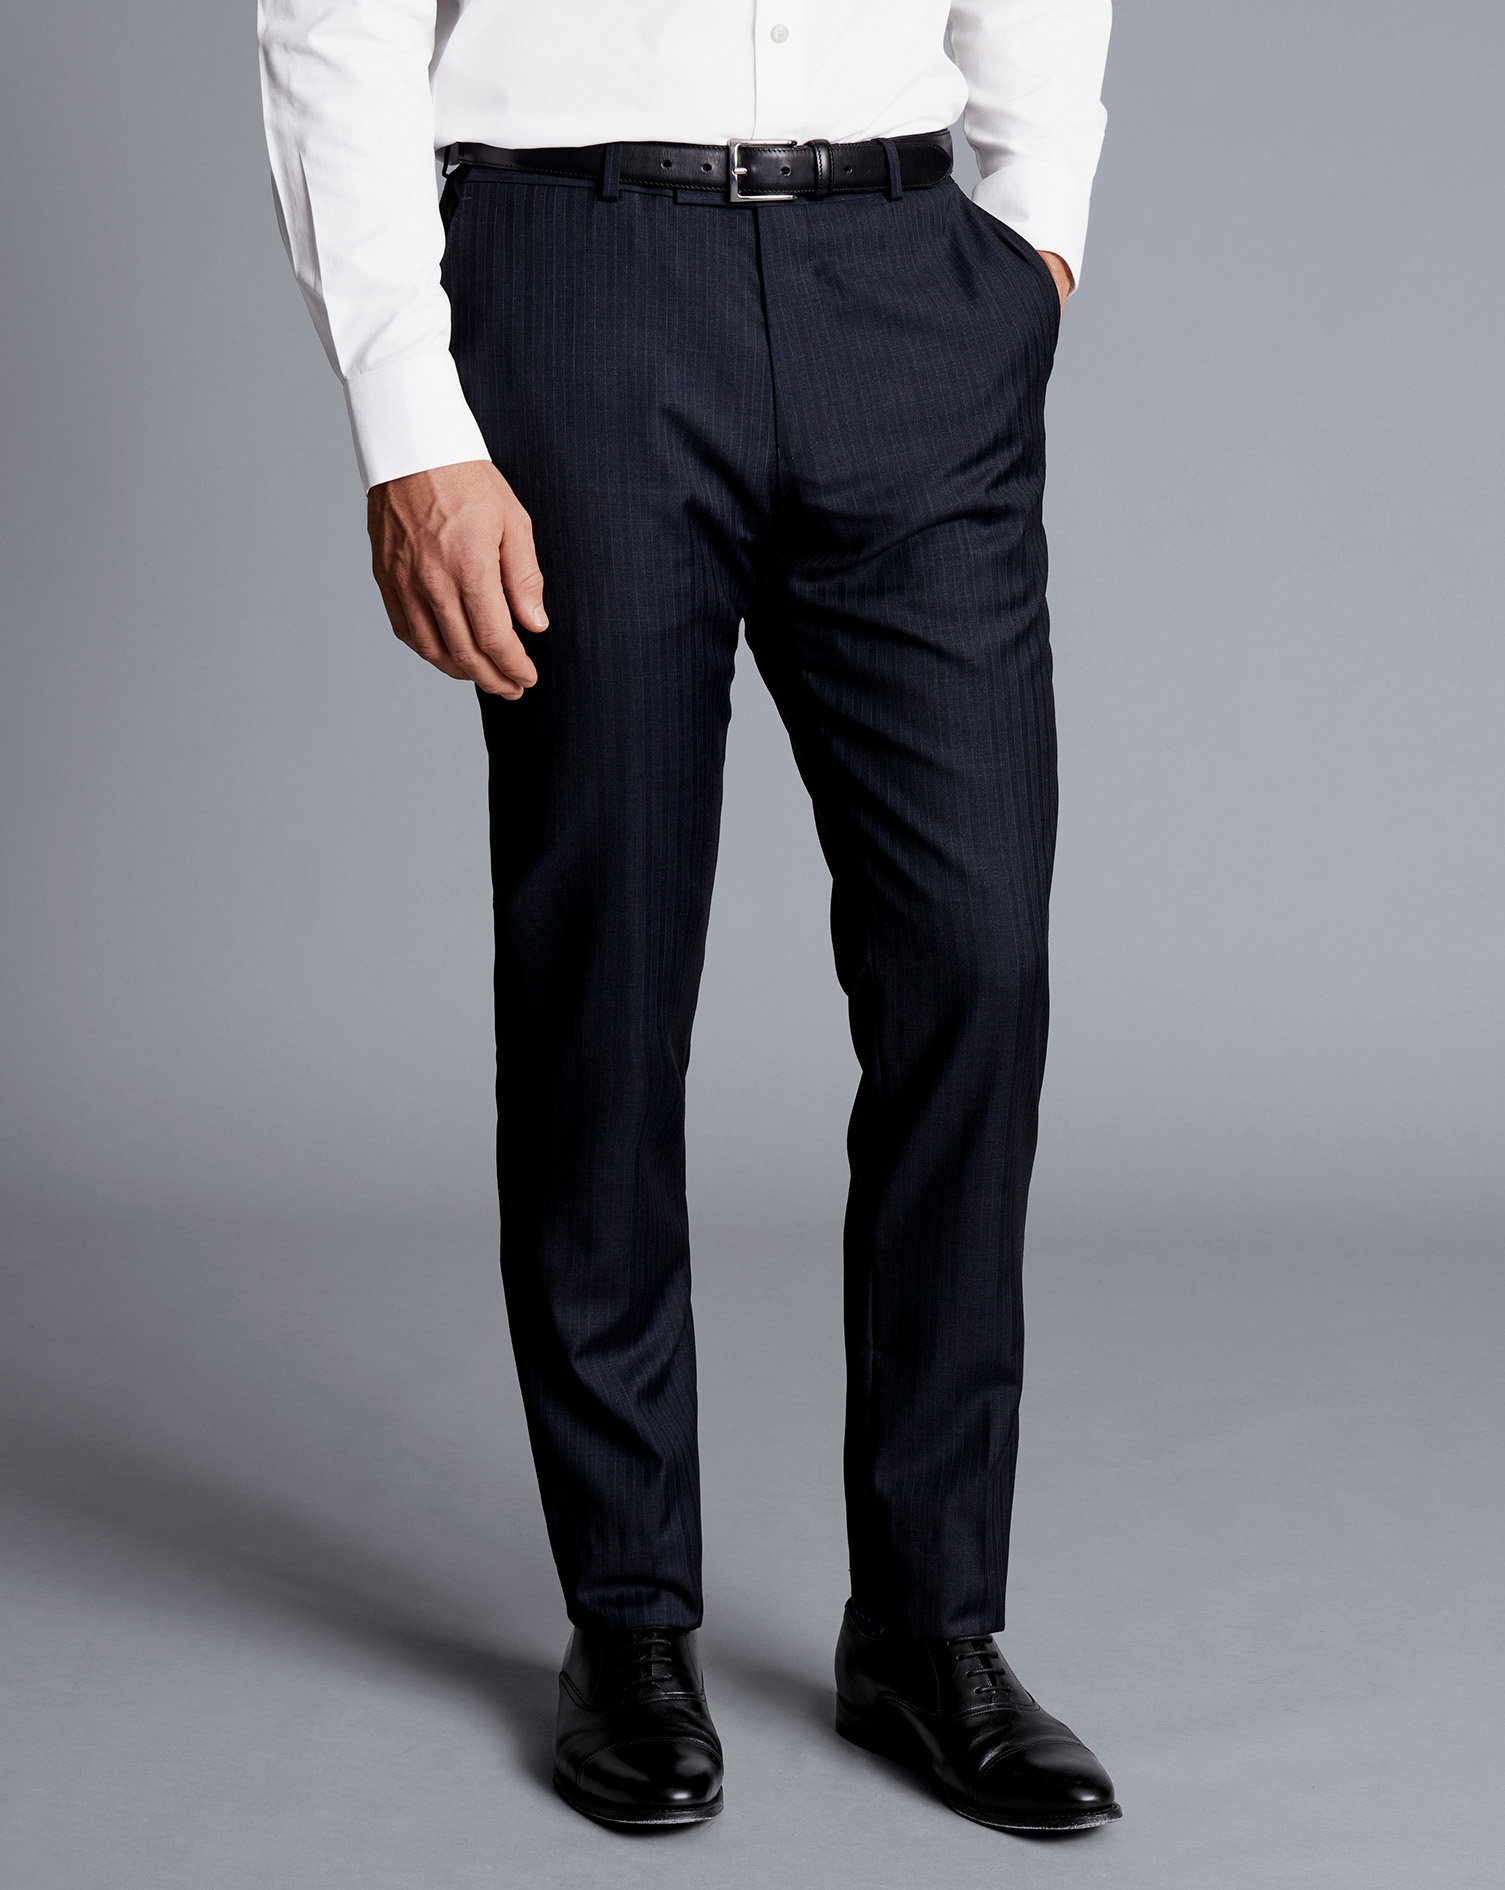 Slim Fit Suit trousers - White - Men | H&M IN